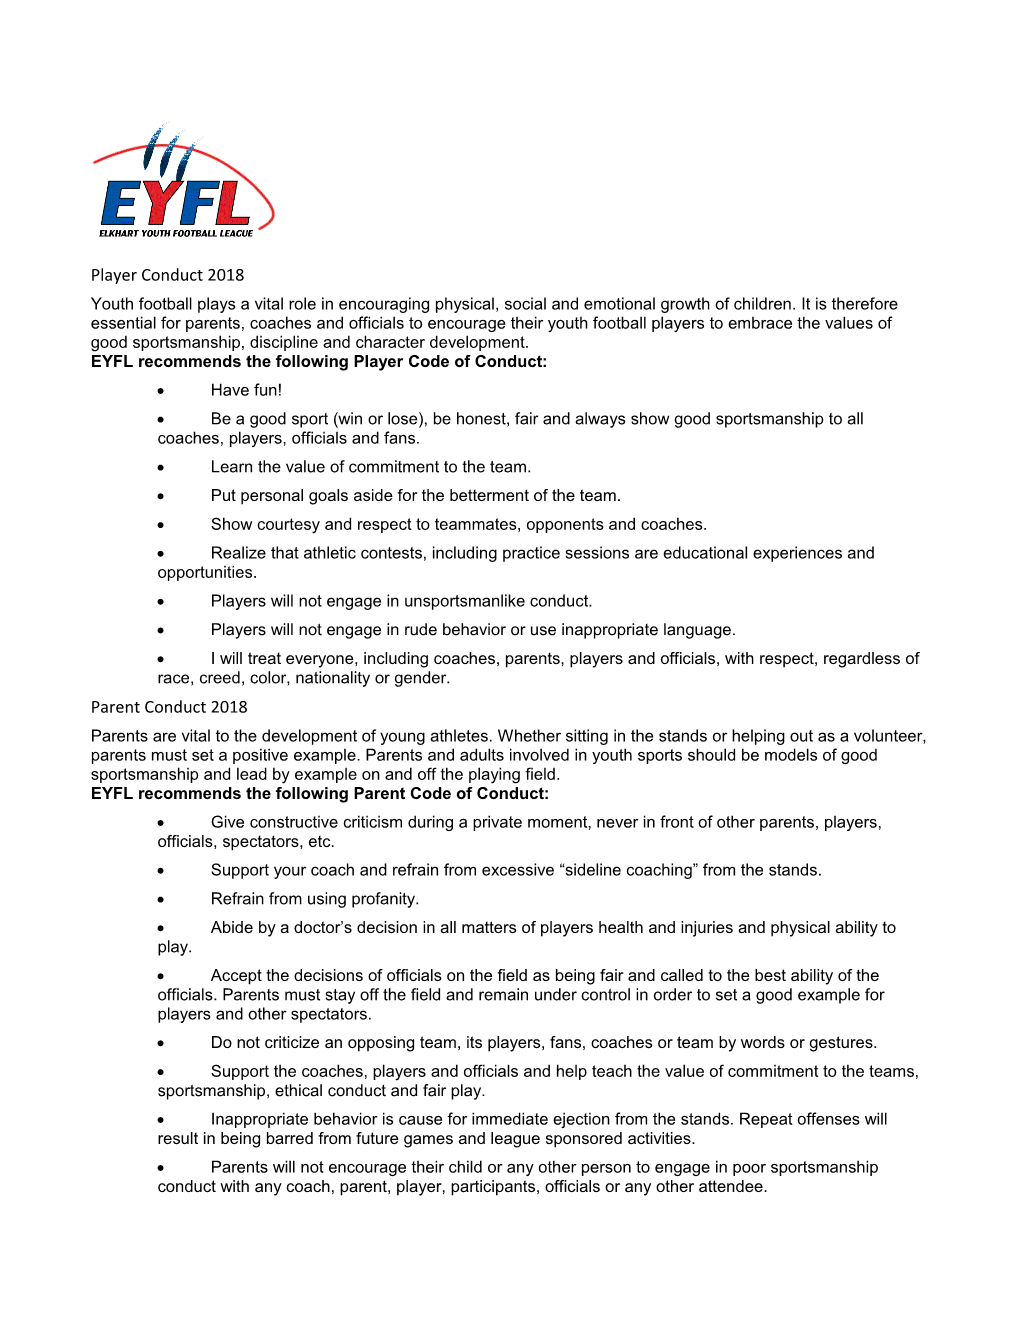 EYFL Recommends the Following Player Code of Conduct